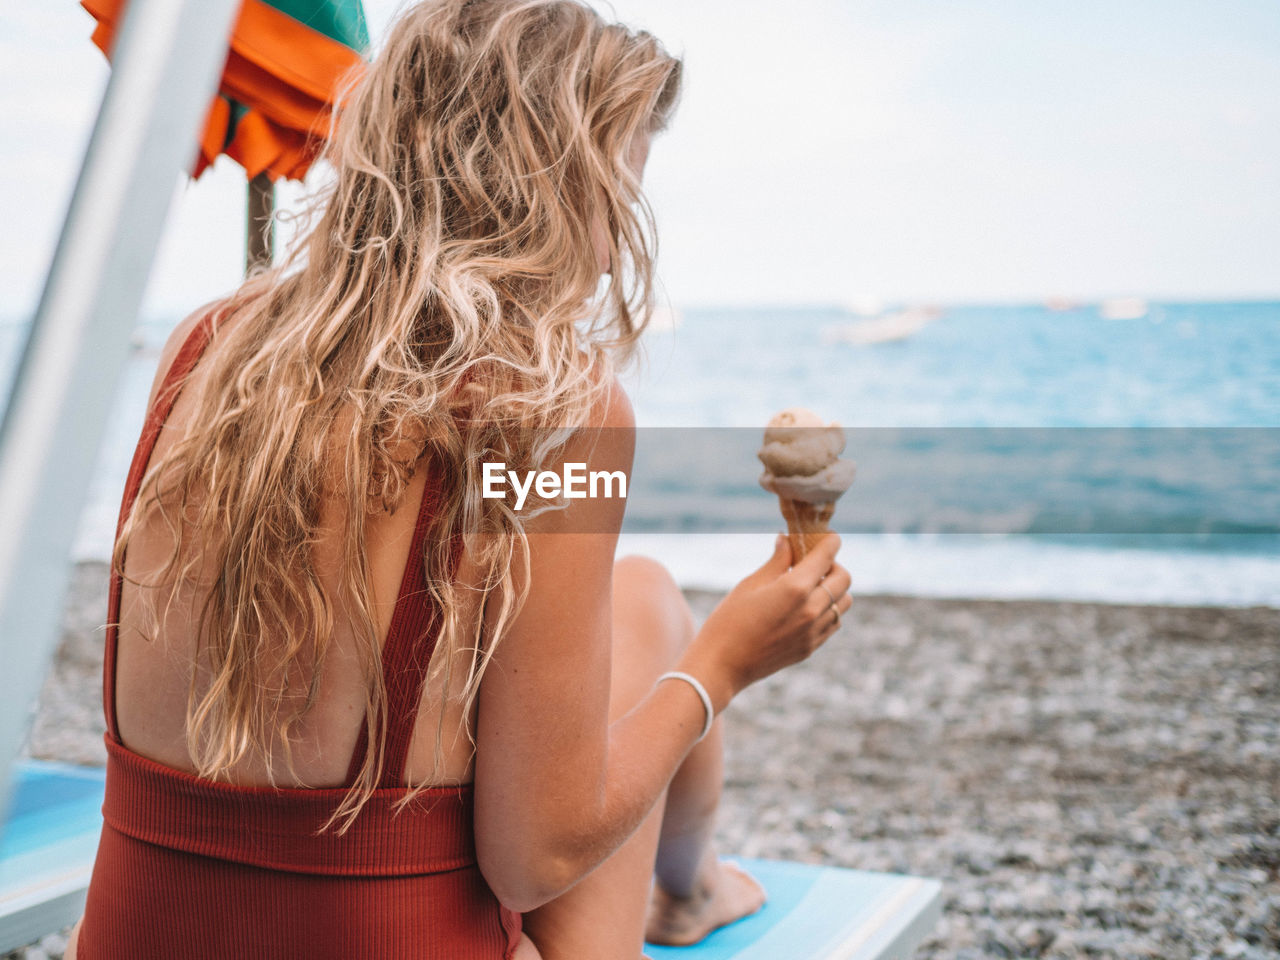 Woman with ice cream sitting on lounge chair at beach